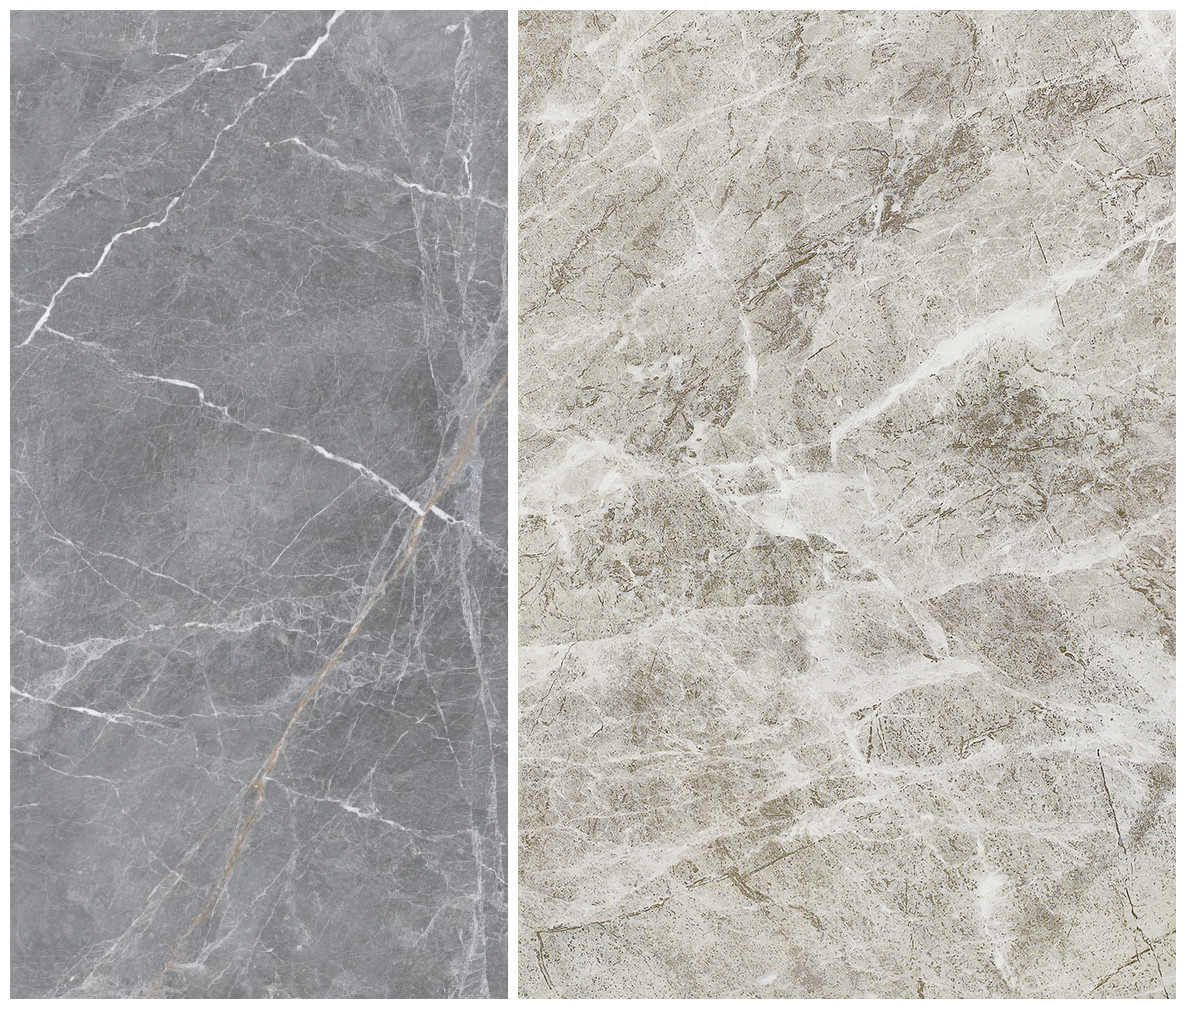 What role does marble play in decoration?